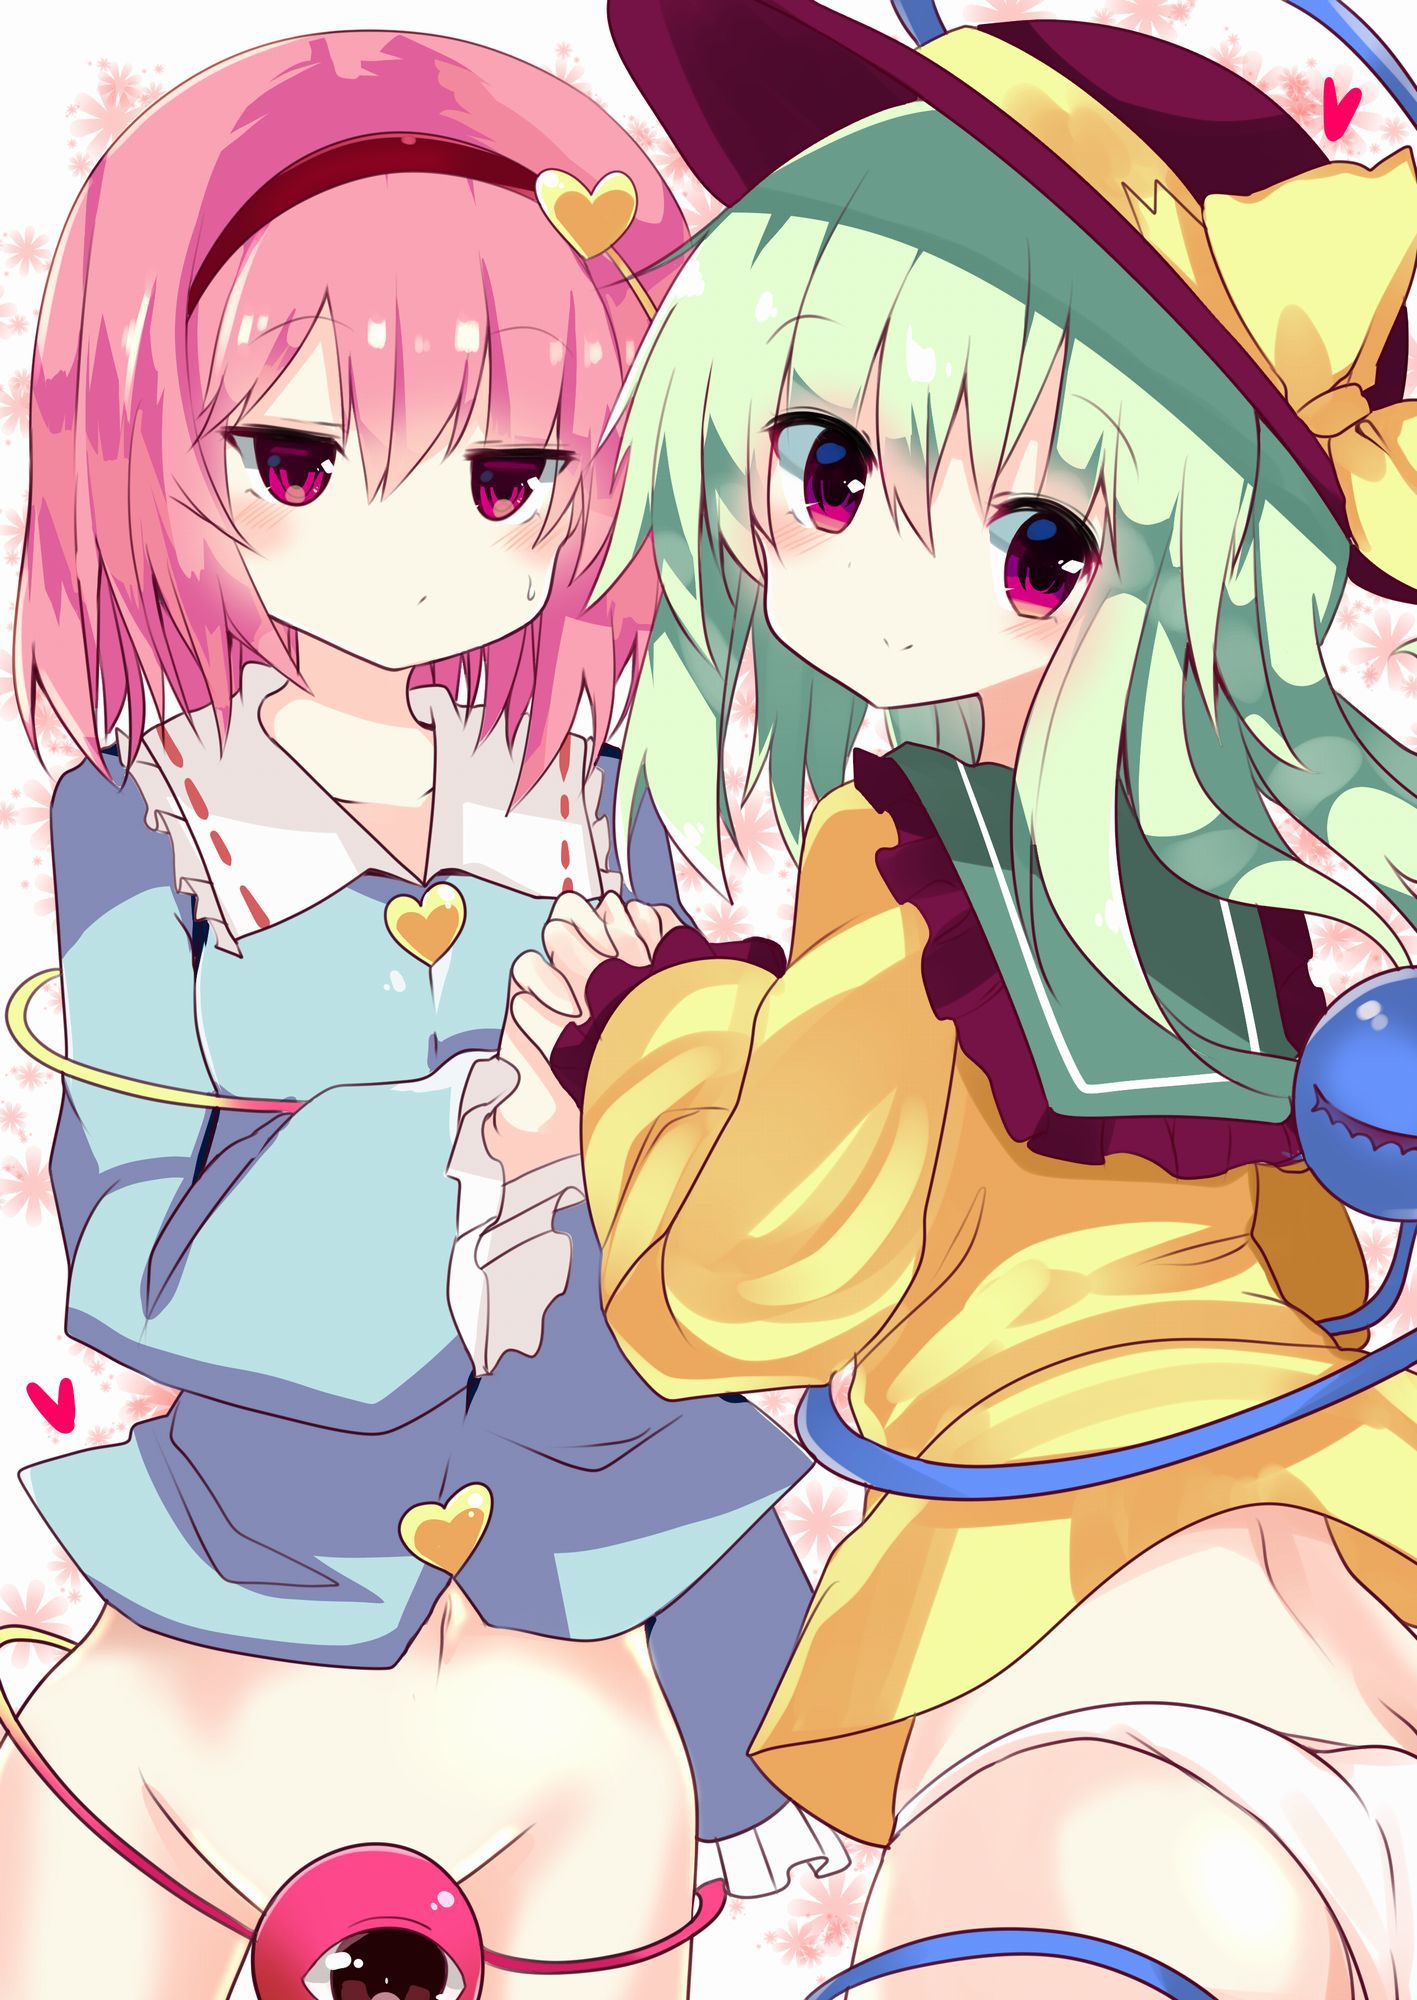 Two-dimensional erotic image that I want to look at loli pants of insanely cute little girls 6